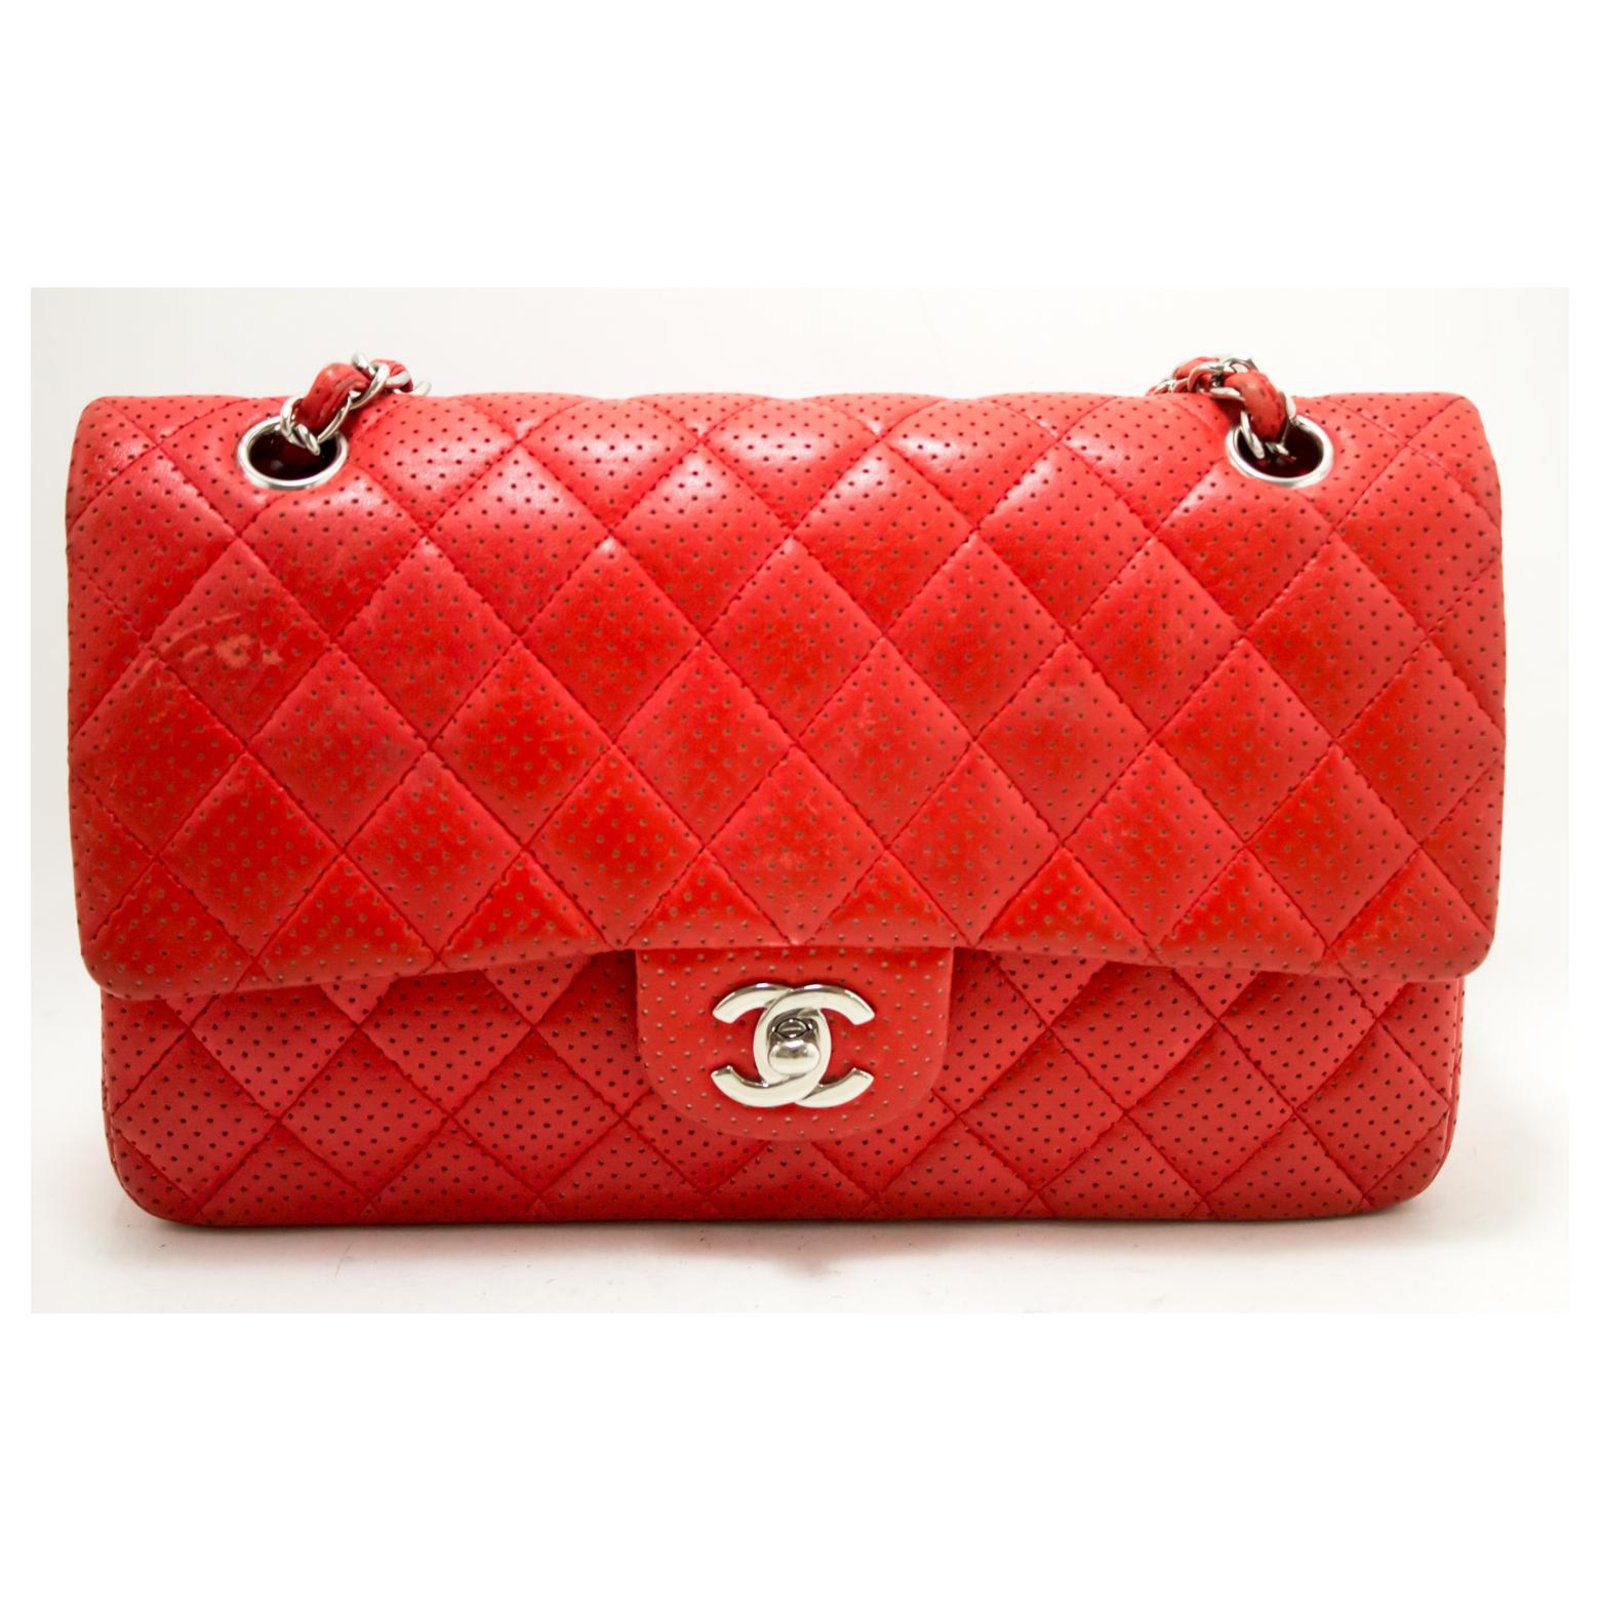 CHANEL Red Punching Leather lined Flap Chain Shoulder Bag Quilted